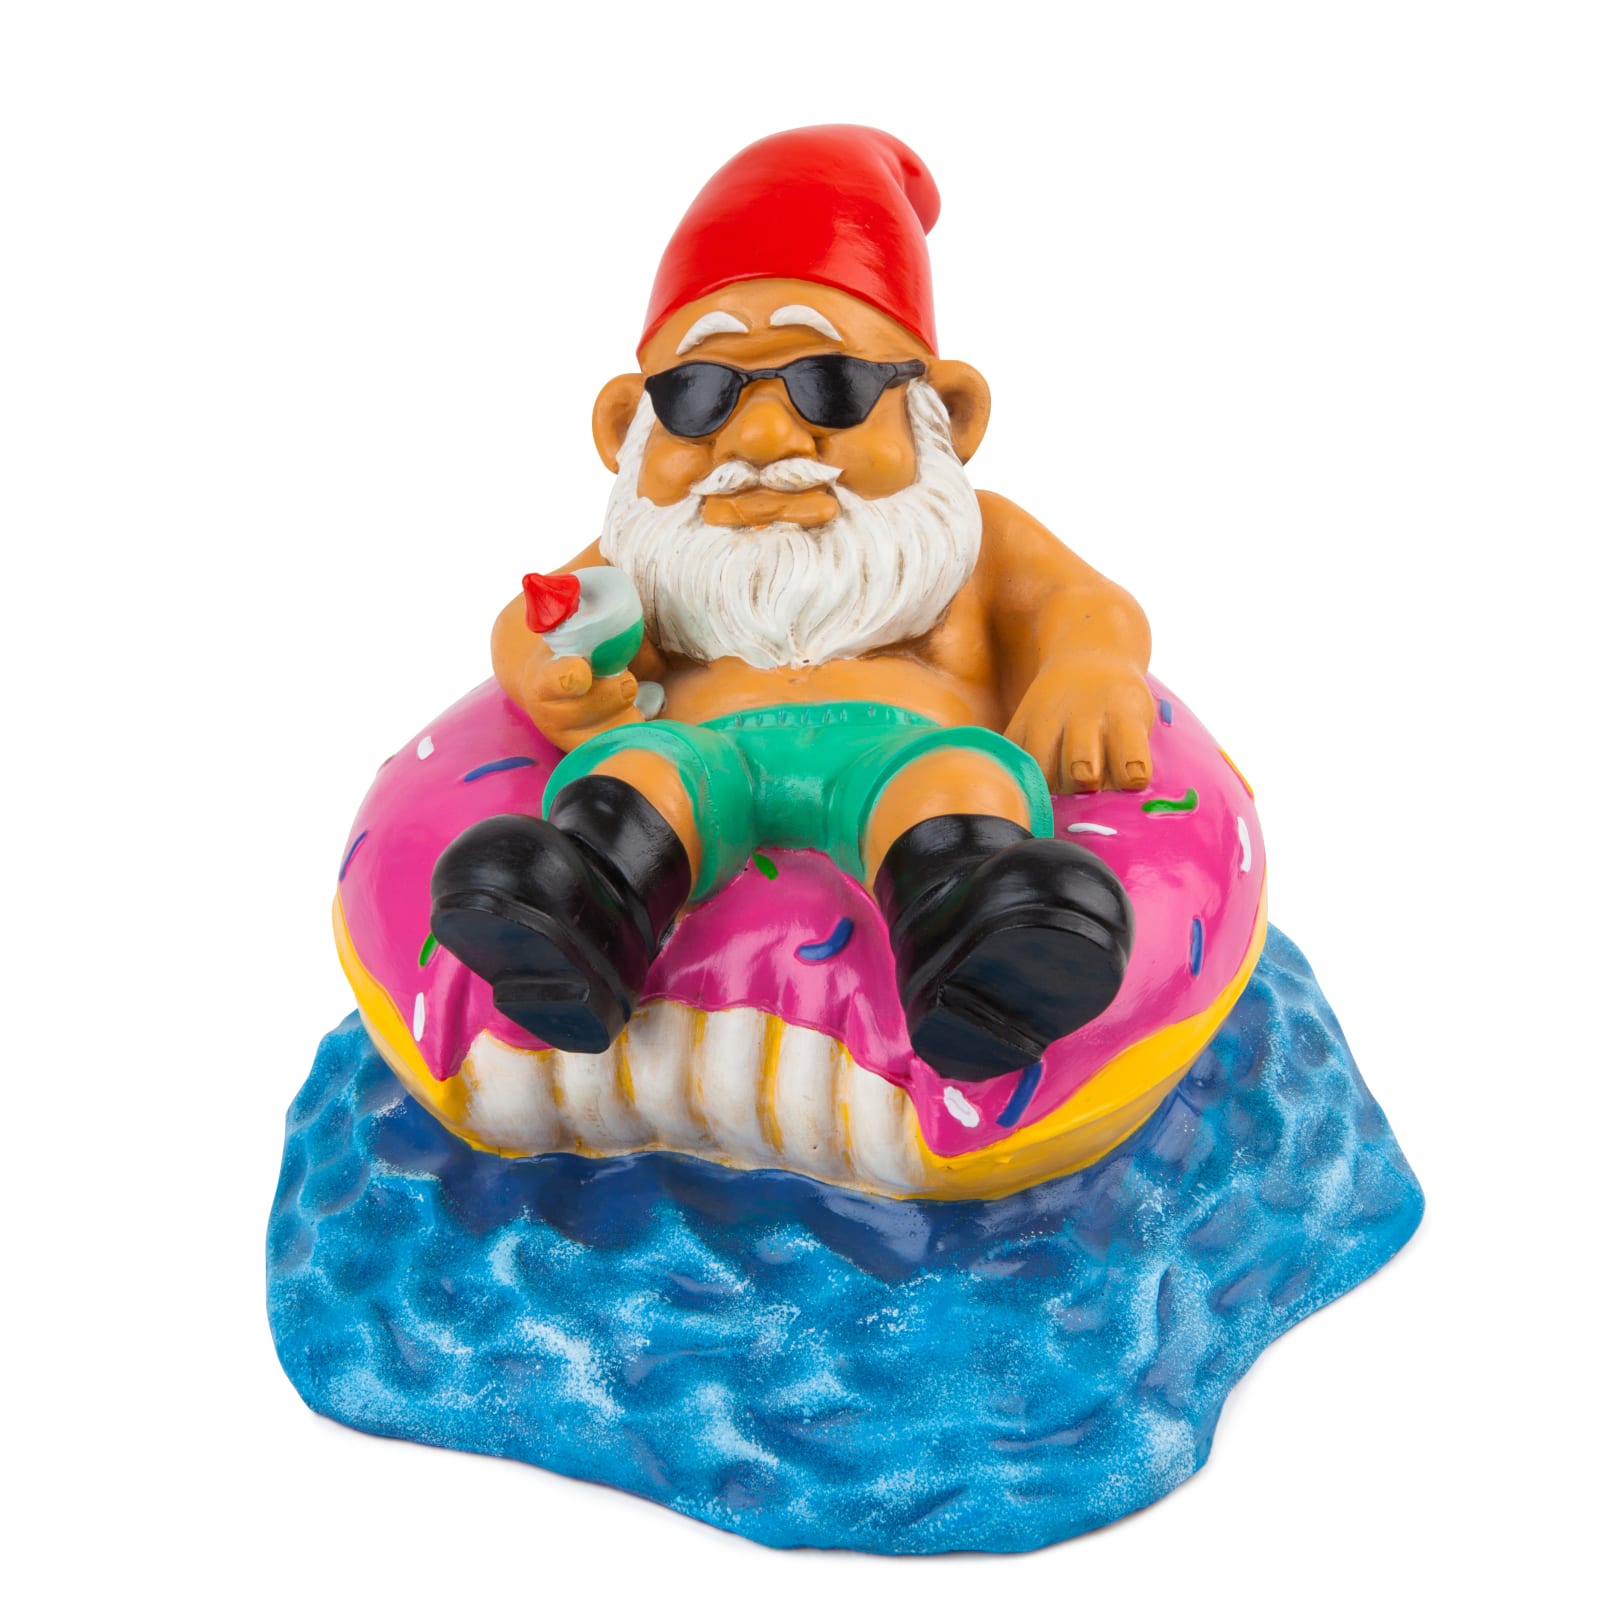 The Donut Worry Be Happy Garden Gnome